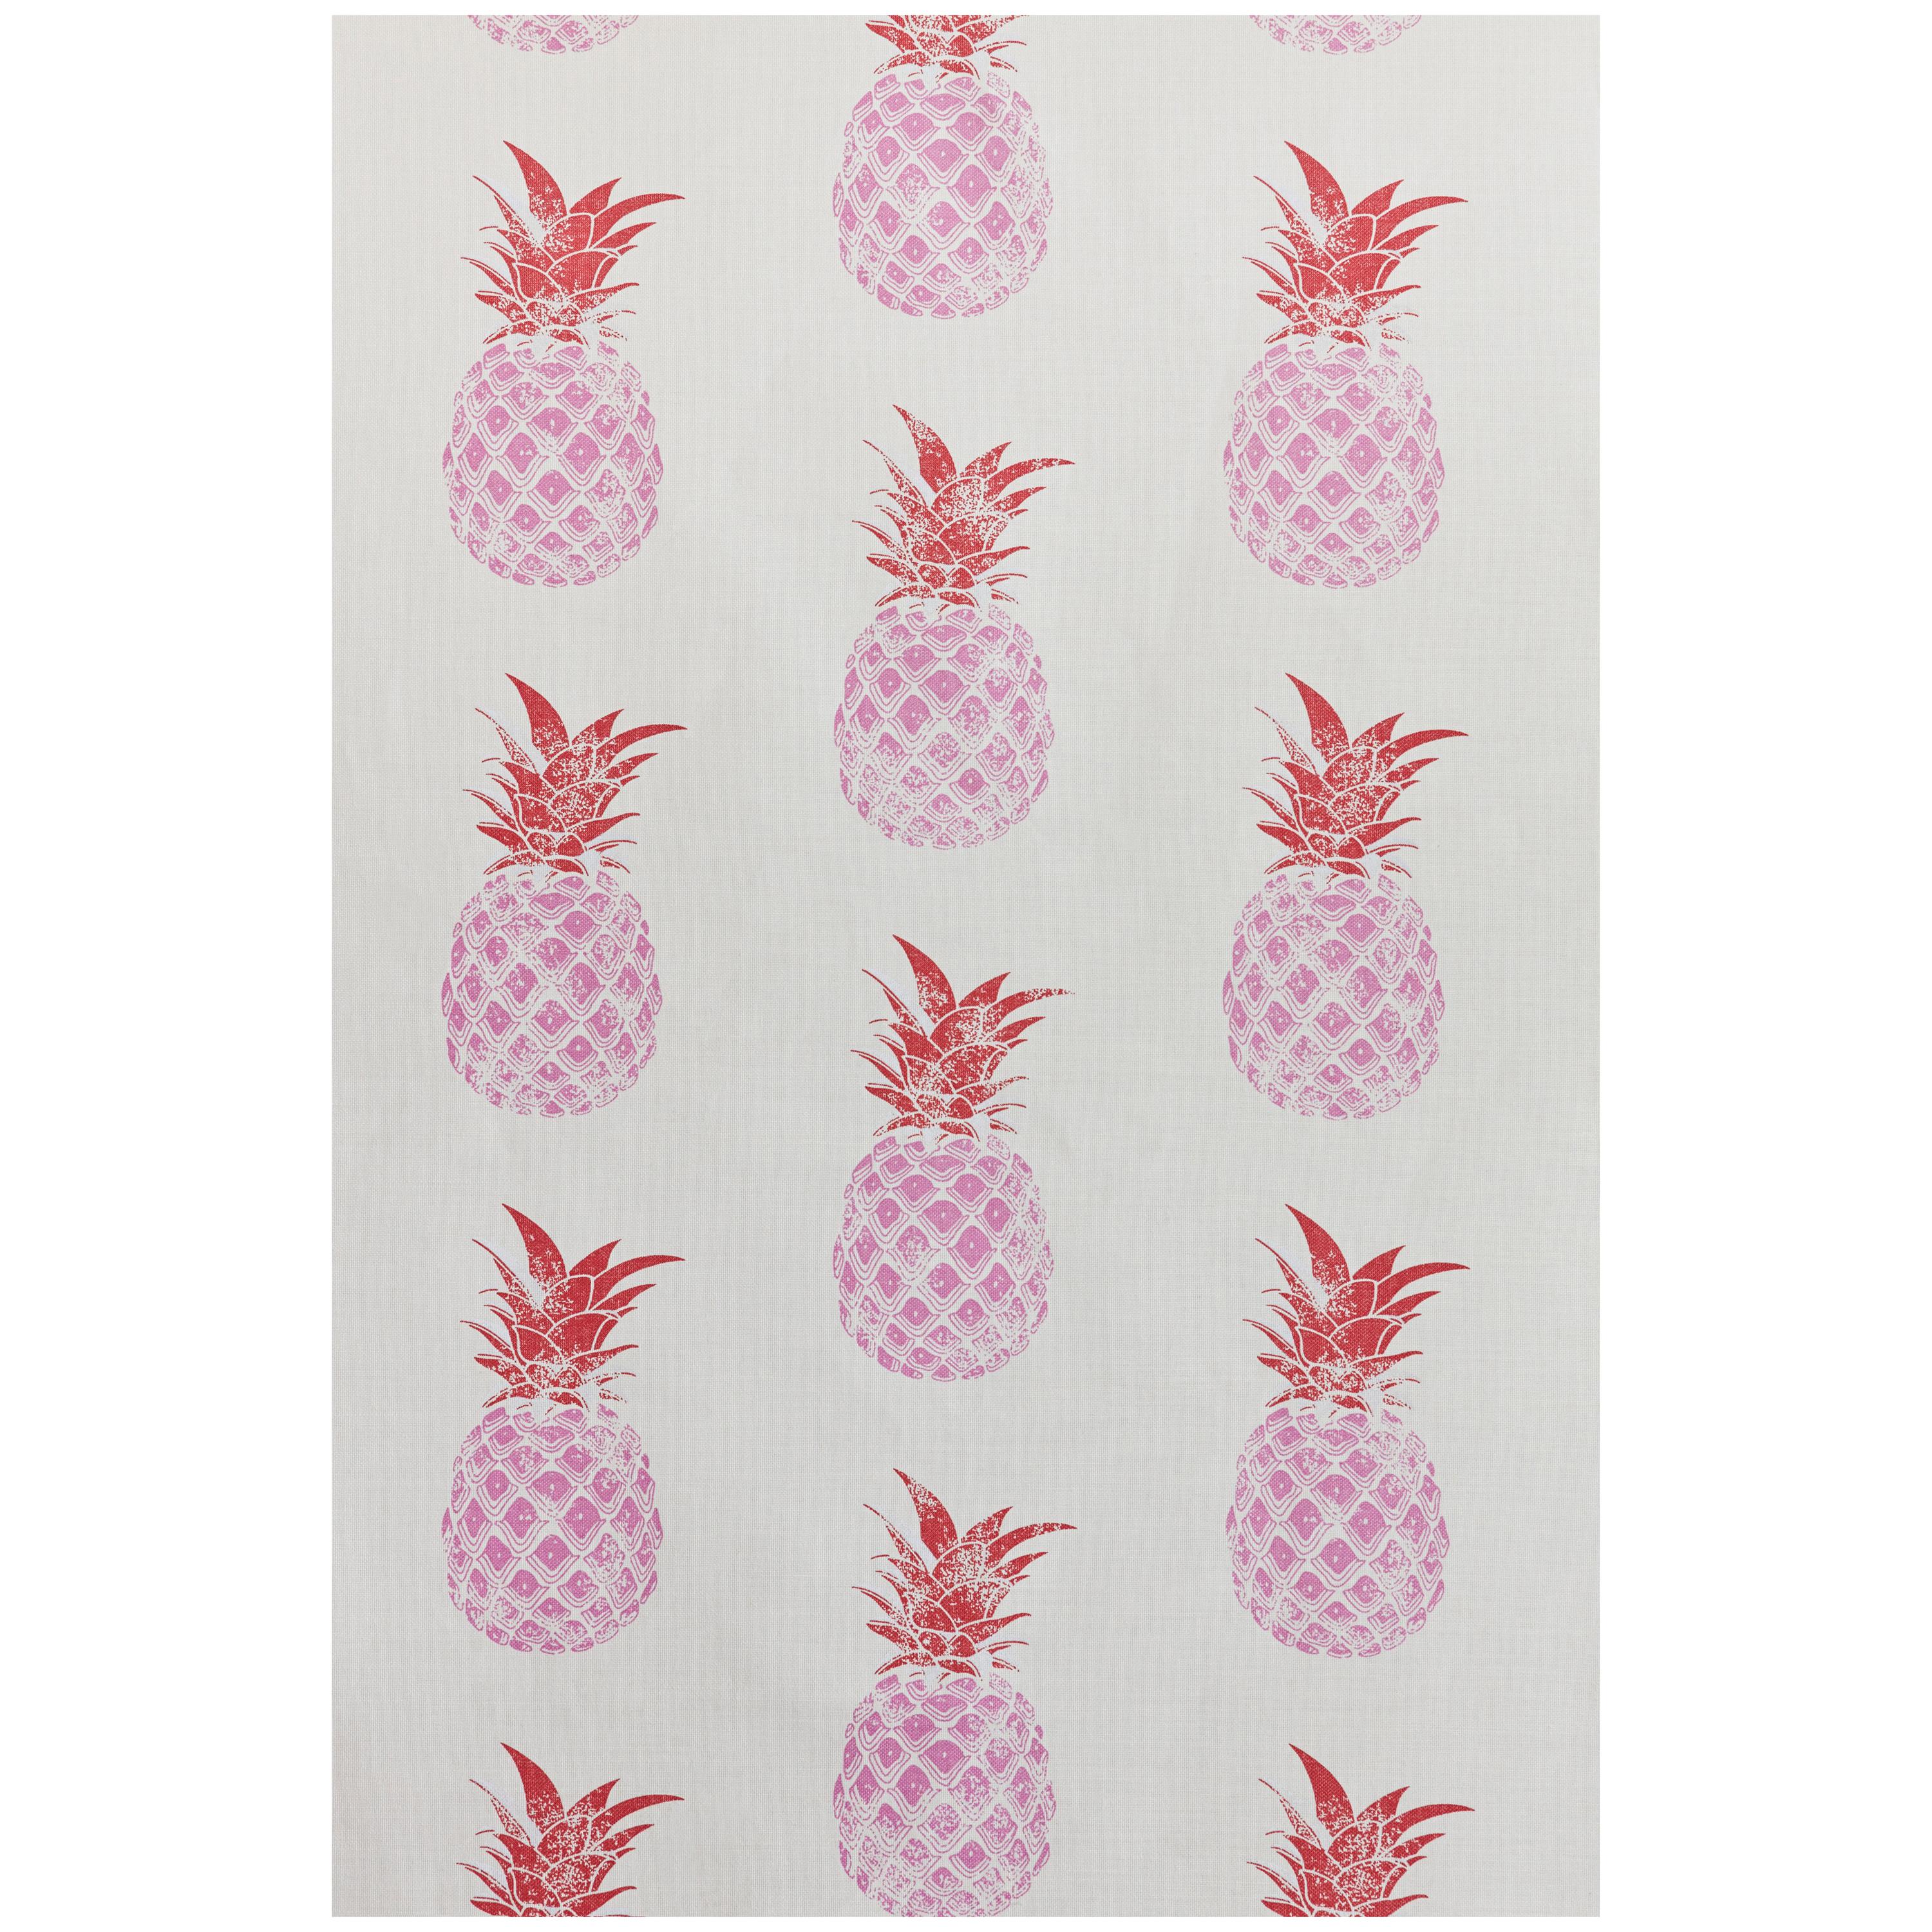 'Pineapple' Contemporary, Traditional Fabric in Pink/Red on Cream For Sale